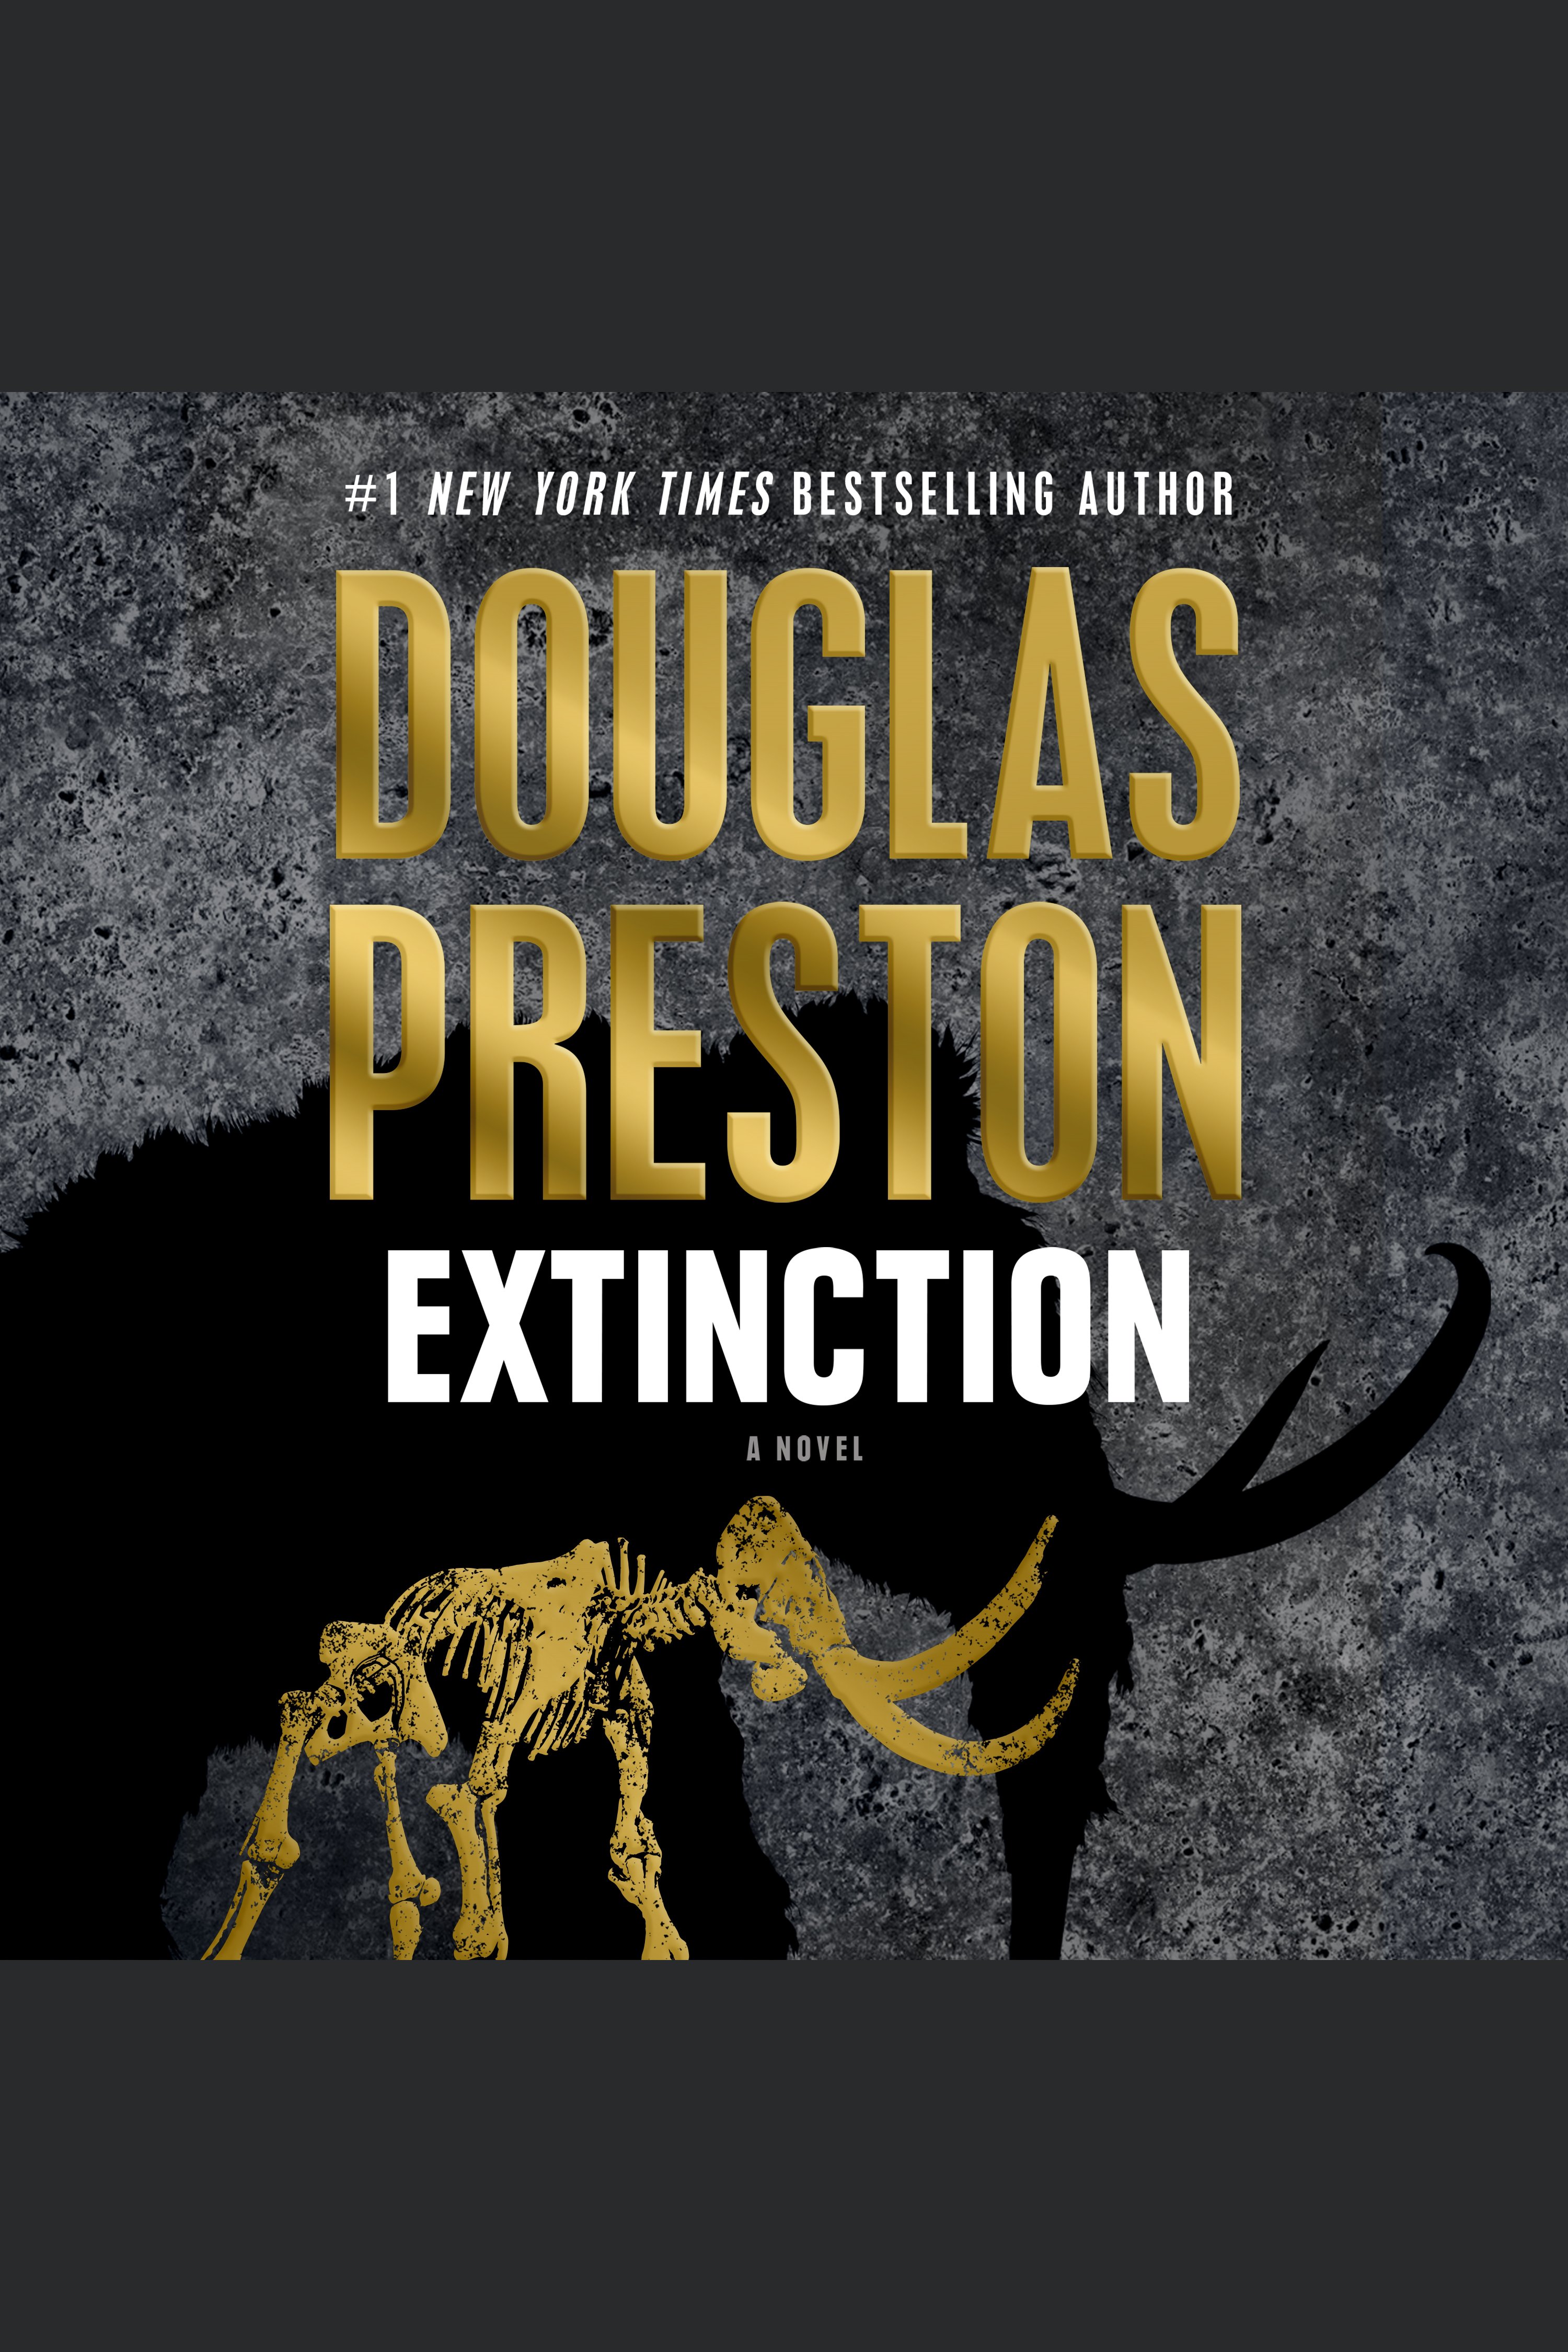 Extinction cover image